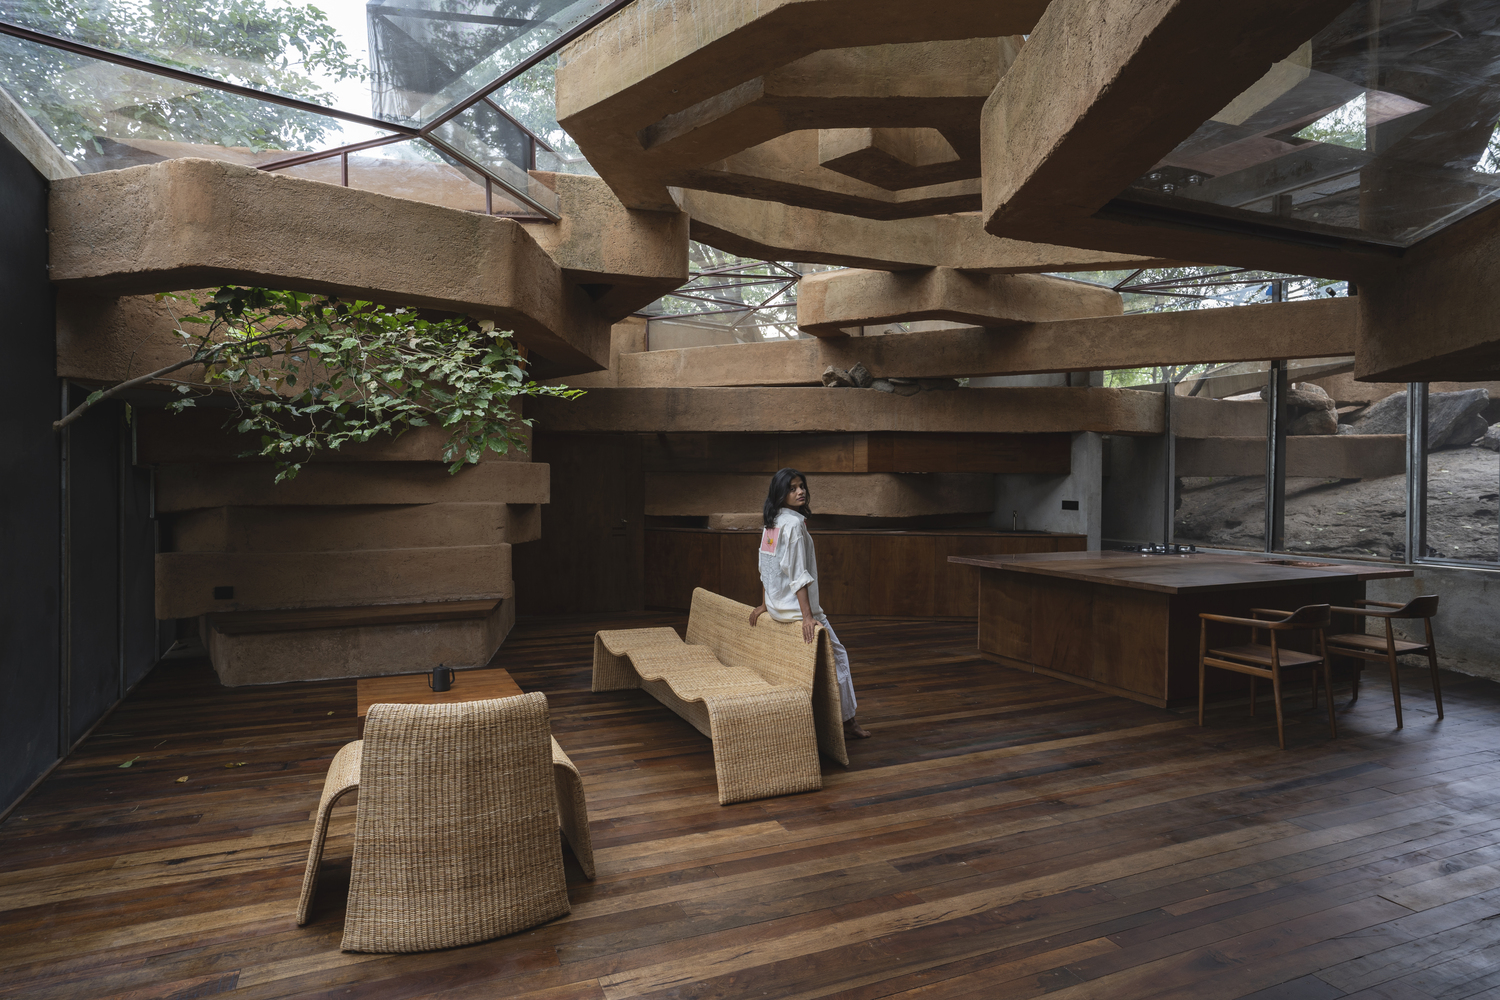 Furniture is made from natural materials to harmonize the building